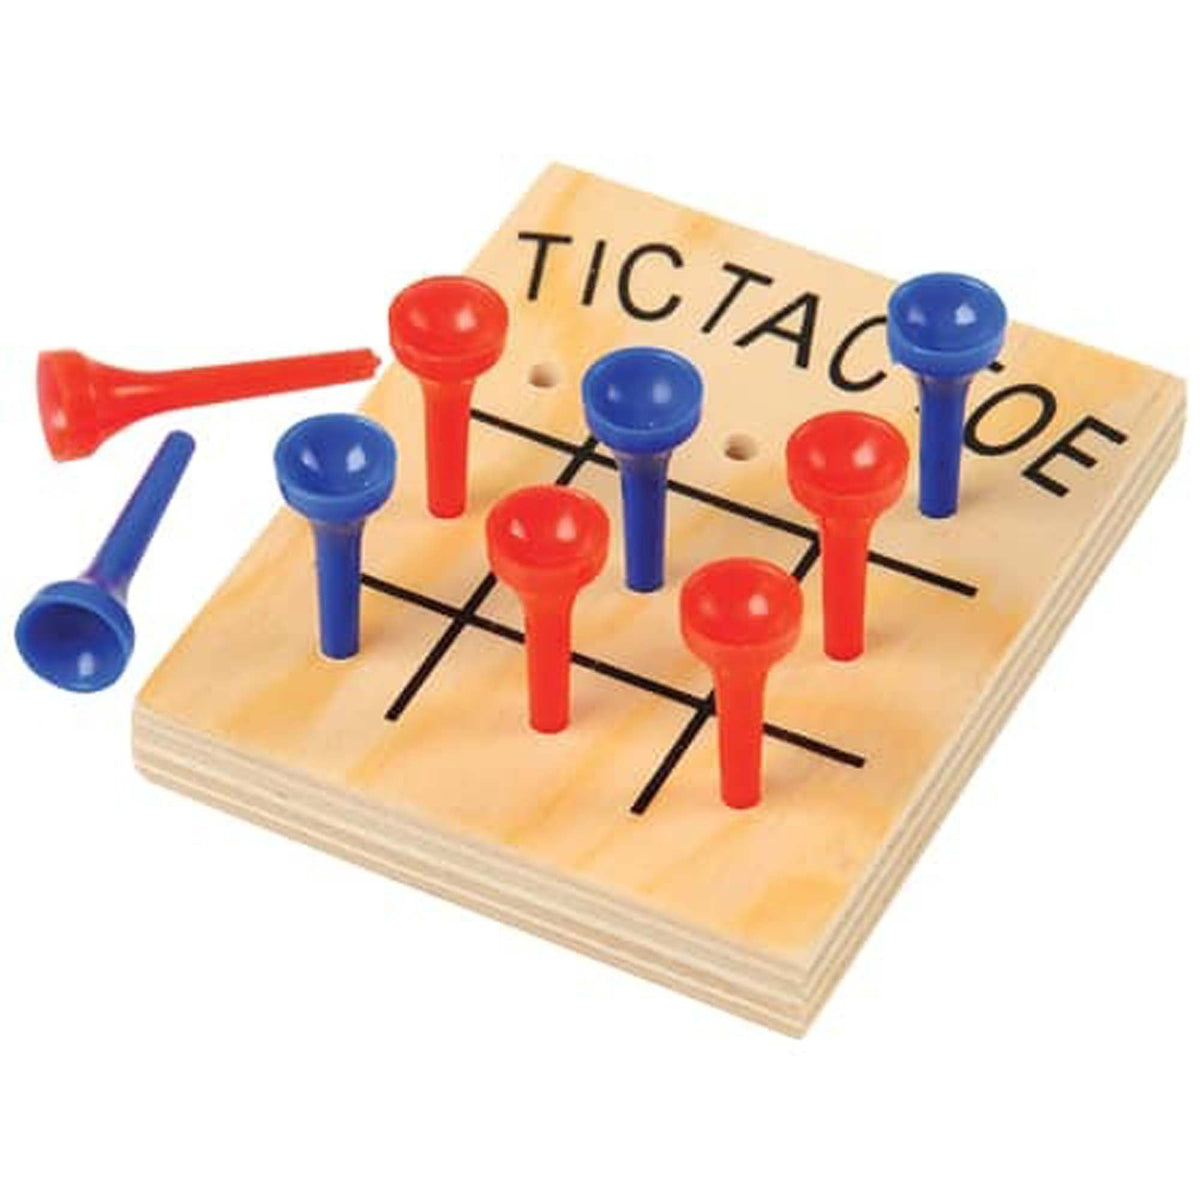 U.S. TOYS Toys & Games Wooden Tic-Tac-Toe, 1 Count